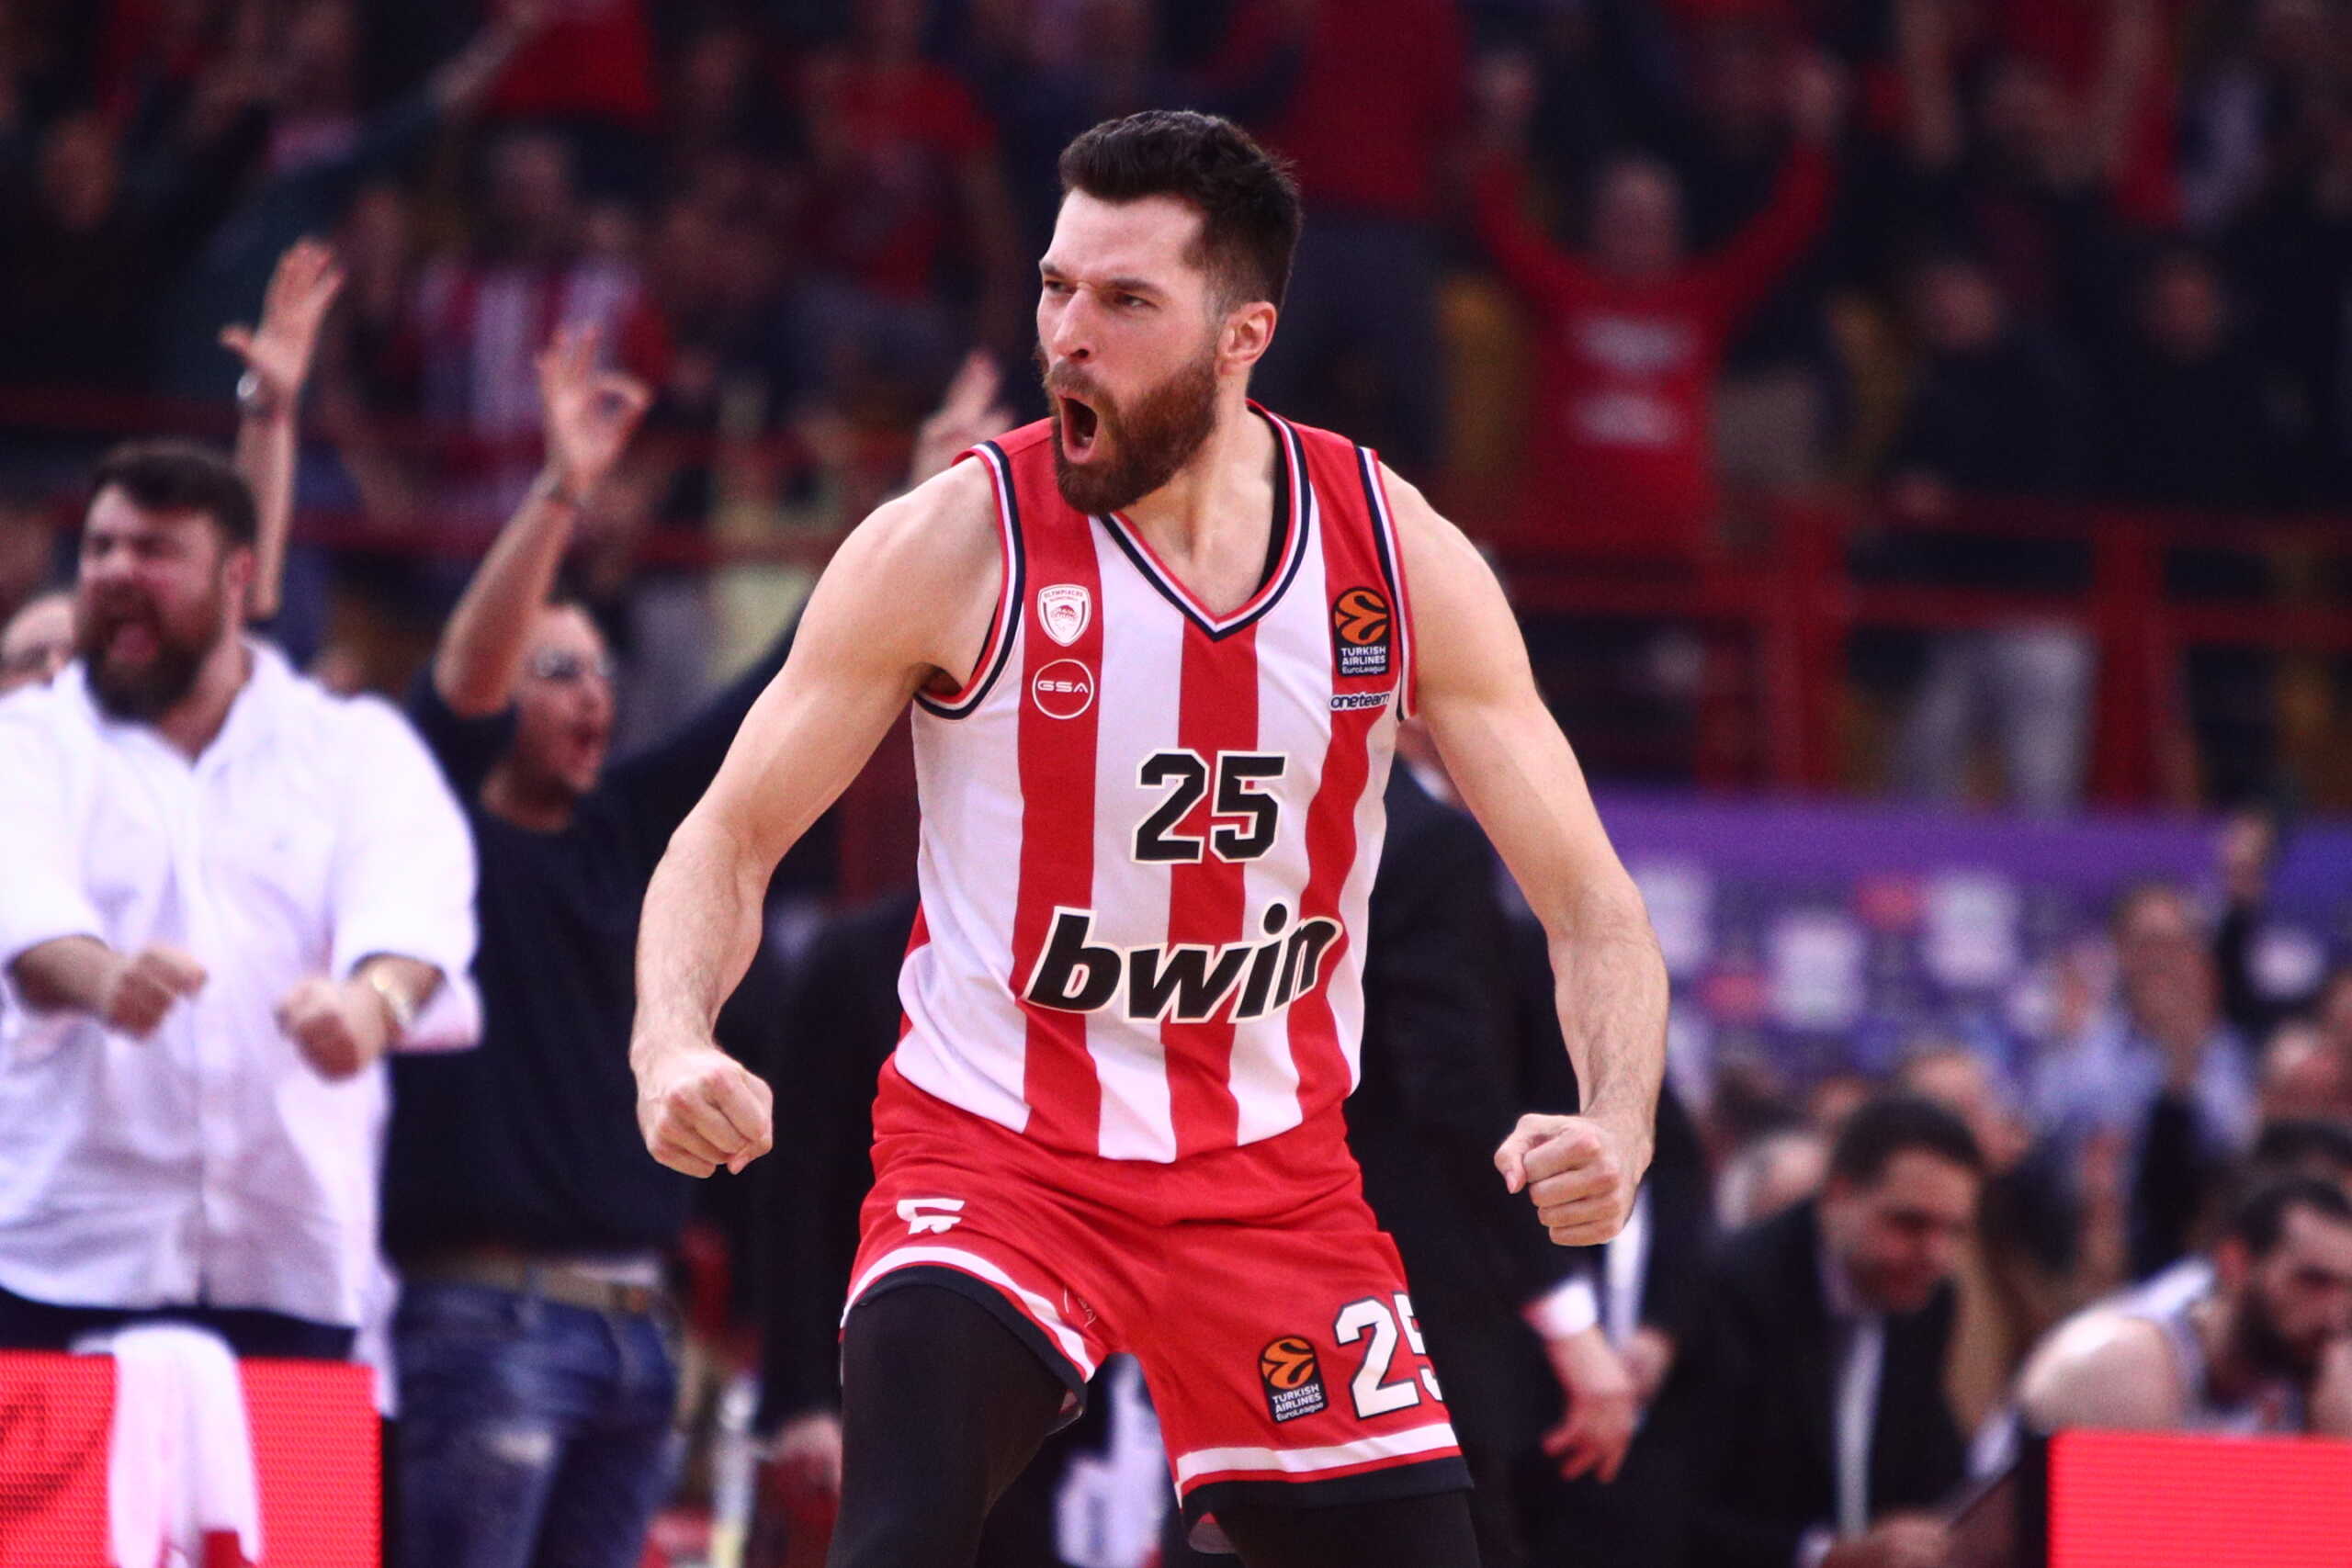 Death to home advantage after Olympiacos' win over Virtus Bologna